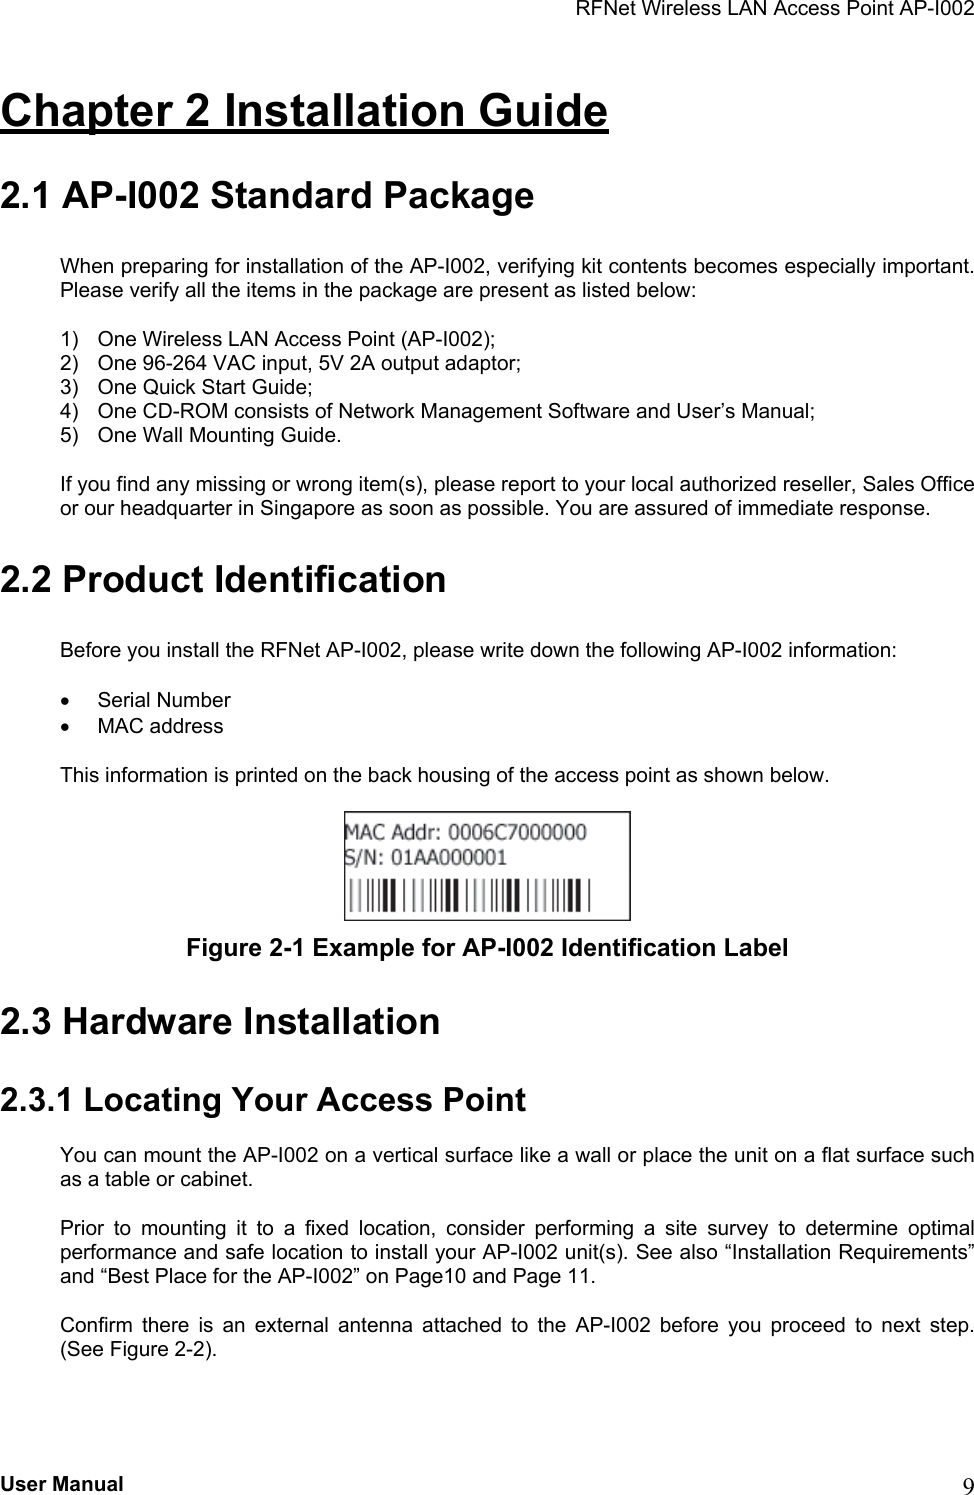 RFNet Wireless LAN Access Point AP-I002 Chapter 2 Installation Guide 2.1 AP-I002 Standard Package When preparing for installation of the AP-I002, verifying kit contents becomes especially important. Please verify all the items in the package are present as listed below: 1)  One Wireless LAN Access Point (AP-I002); 2)  One 96-264 VAC input, 5V 2A output adaptor; 3)  One Quick Start Guide; 4)  One CD-ROM consists of Network Management Software and User’s Manual; 5)  One Wall Mounting Guide. If you find any missing or wrong item(s), please report to your local authorized reseller, Sales Office or our headquarter in Singapore as soon as possible. You are assured of immediate response.   2.2 Product Identification Before you install the RFNet AP-I002, please write down the following AP-I002 information:  •  Serial Number •  MAC address This information is printed on the back housing of the access point as shown below.   Figure 2-1 Example for AP-I002 Identification Label 2.3 Hardware Installation 2.3.1 Locating Your Access Point You can mount the AP-I002 on a vertical surface like a wall or place the unit on a flat surface such as a table or cabinet. Prior to mounting it to a fixed location, consider performing a site survey to determine optimal performance and safe location to install your AP-I002 unit(s). See also “Installation Requirements” and “Best Place for the AP-I002” on Page10 and Page 11. Confirm there is an external antenna attached to the AP-I002 before you proceed to next step. (See Figure 2-2). User Manual  9 